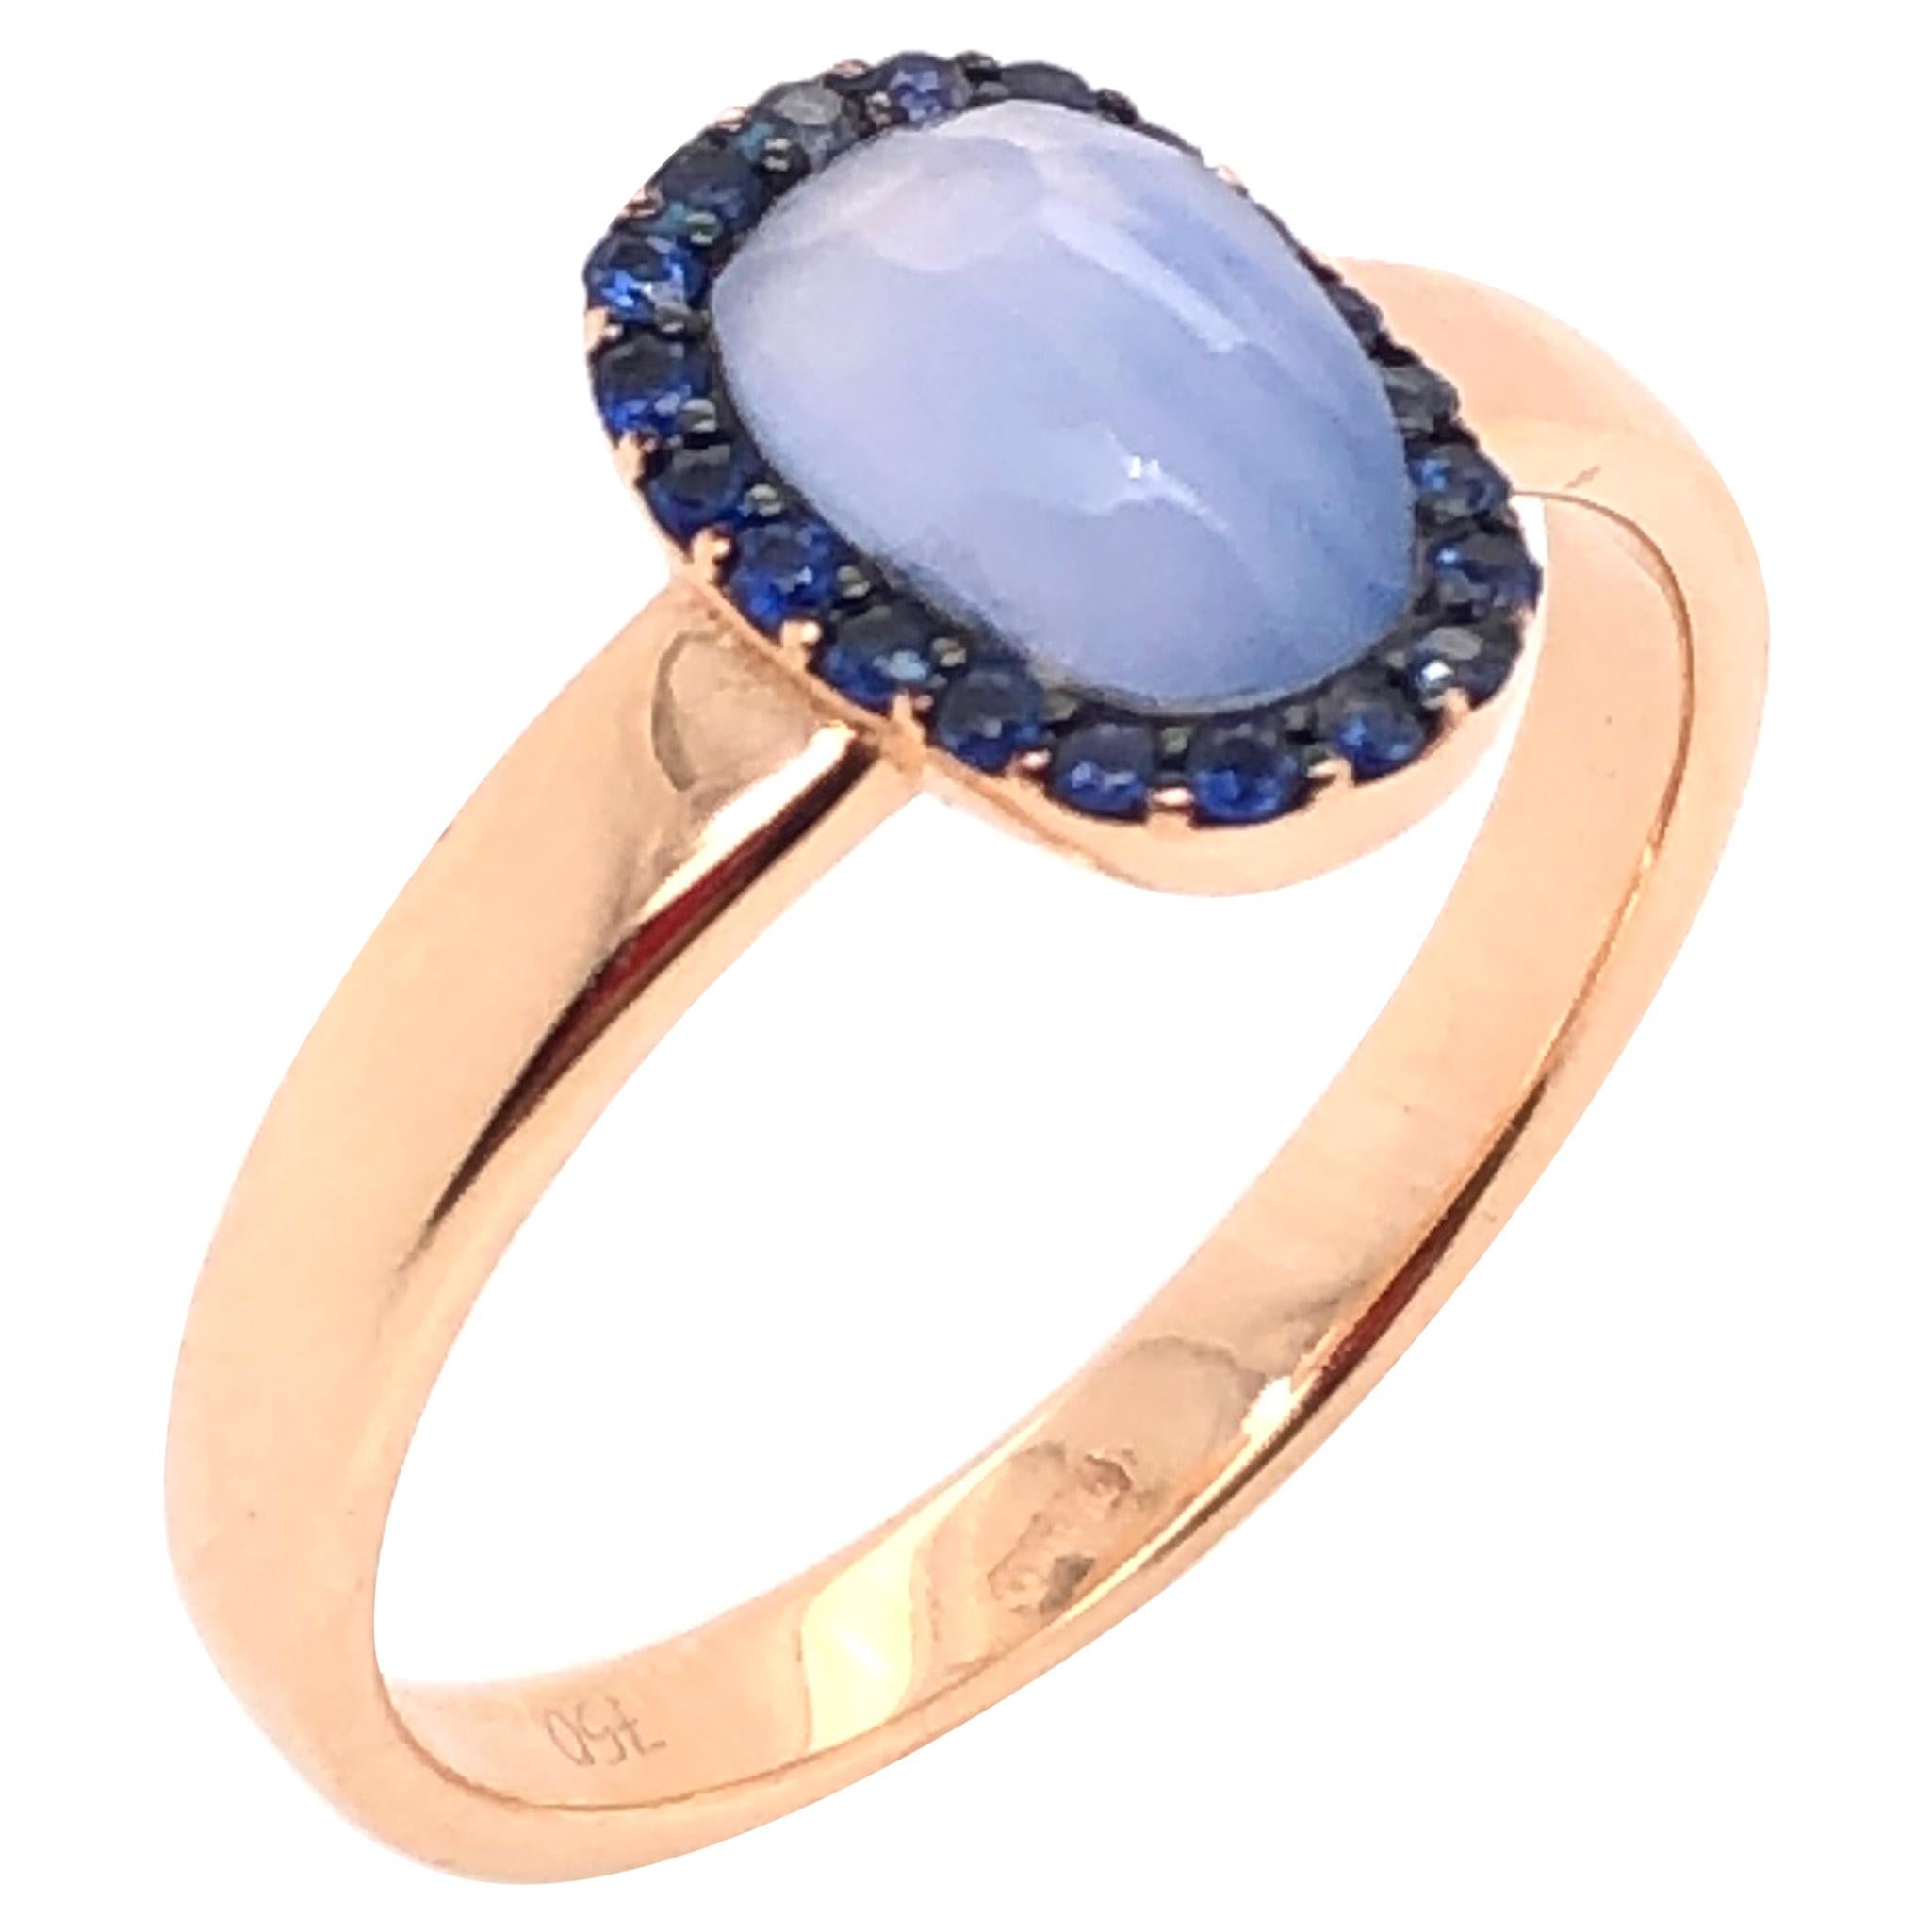 Chalcedony and Blue Sapphire on Rose Gold 18 Karat Ring